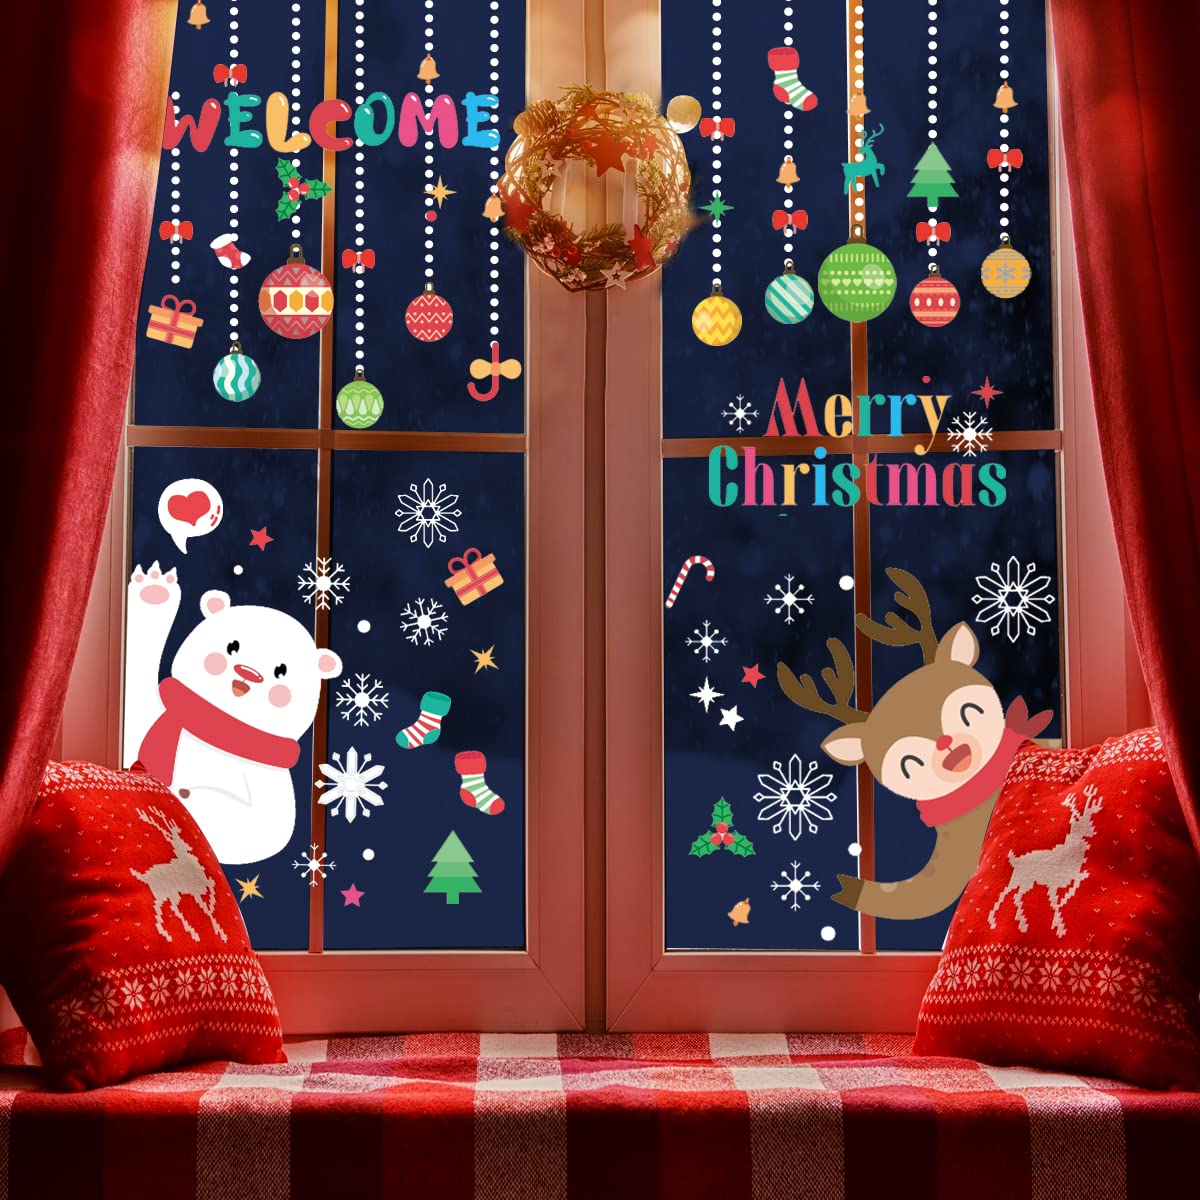 Christmas Window Stickers Large Xmas Window Stickers Scene Snowman Reindeer Snowflakes Decals for Glass Static Reusable Merry Christmas Window Clings for House Shop Christmas Window Decorations